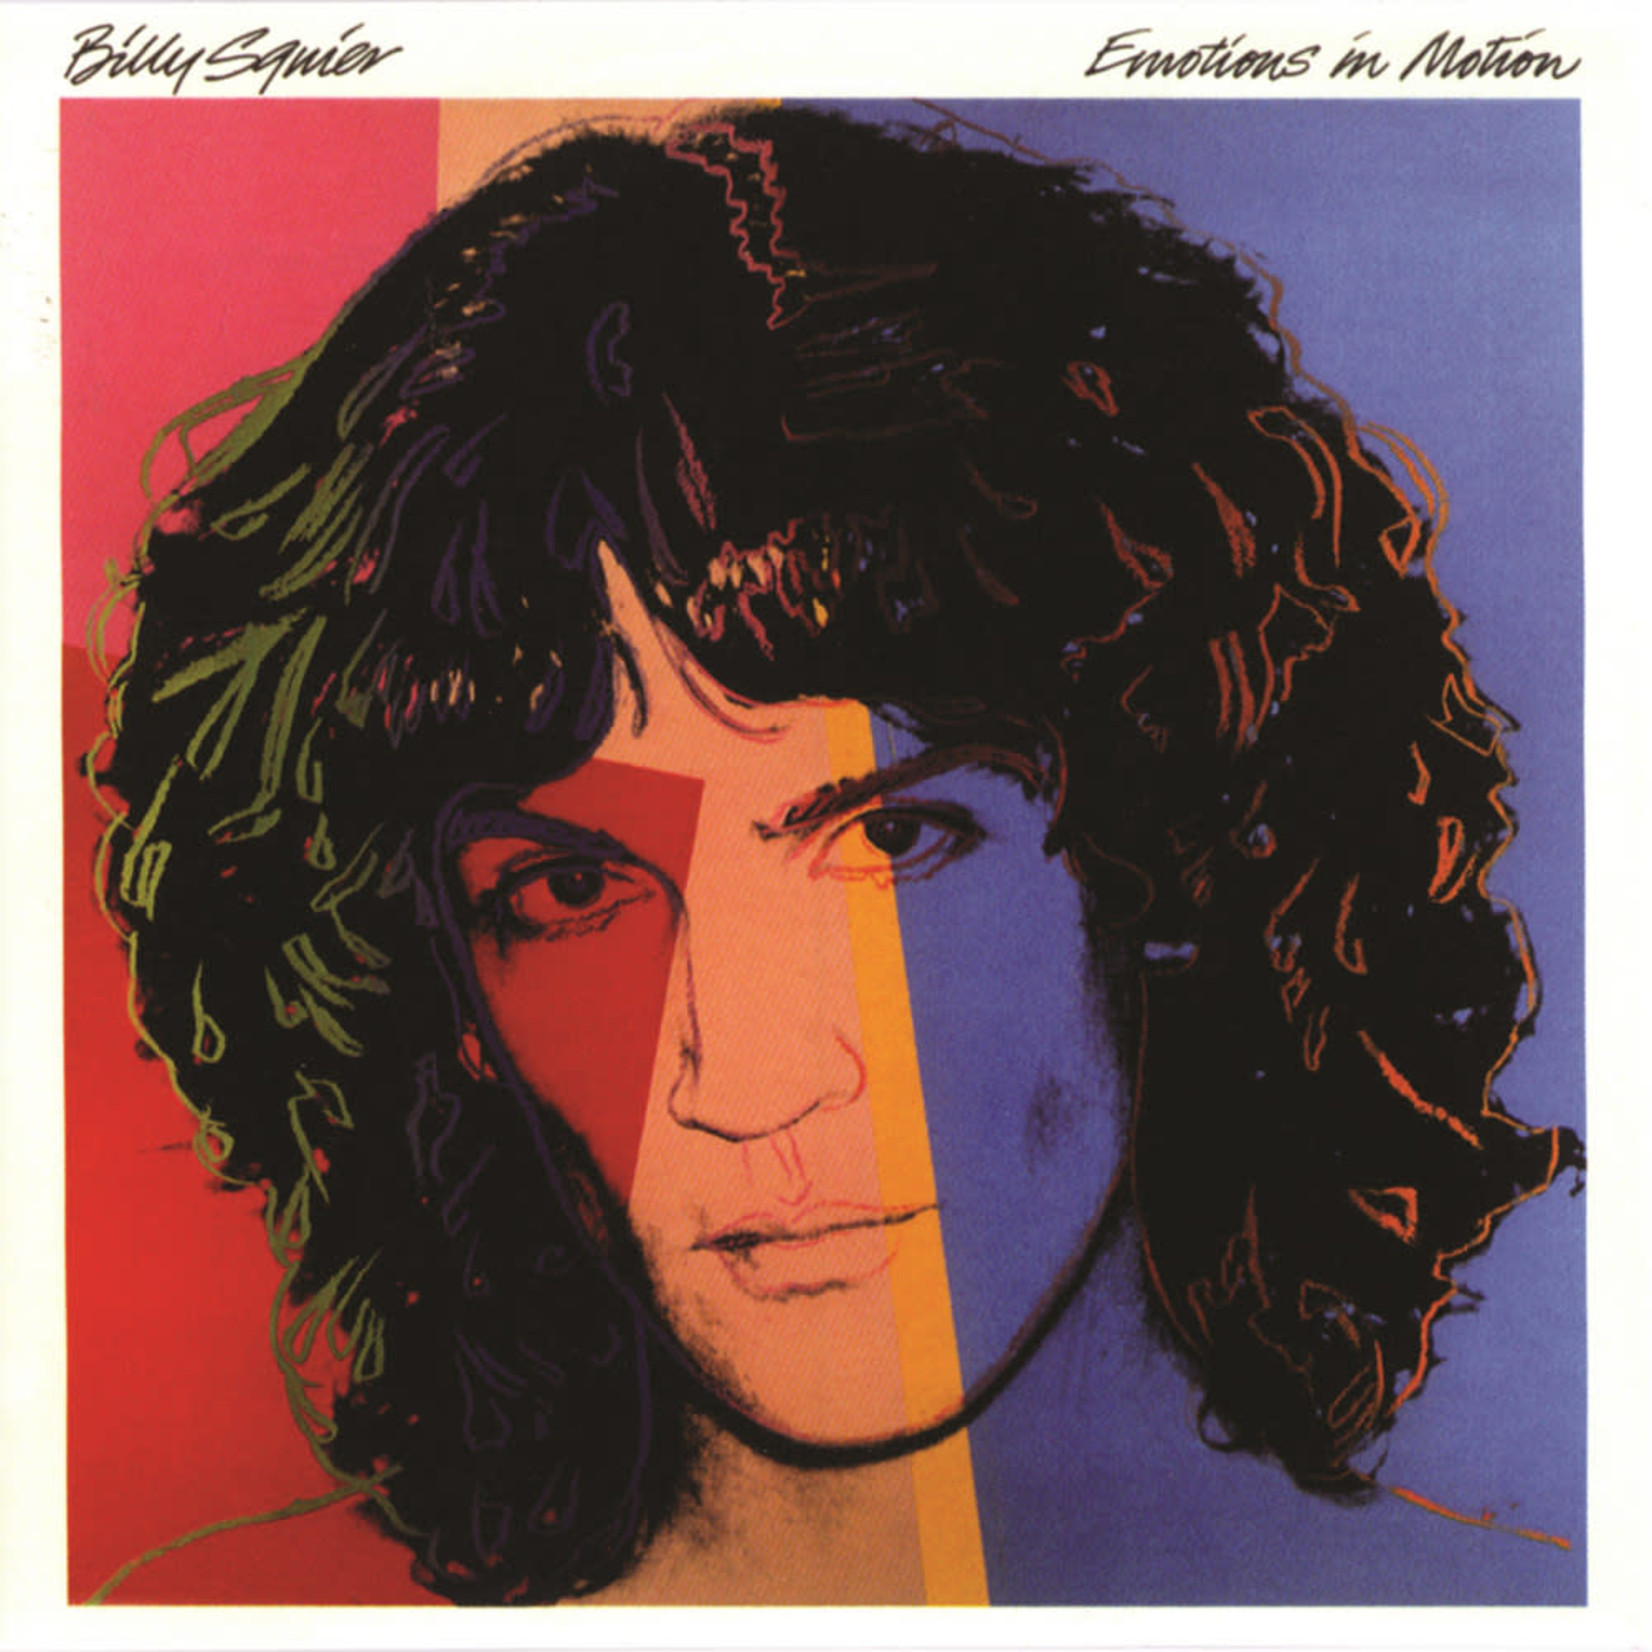 [Vintage] Billy Squier - Emotions in Motion